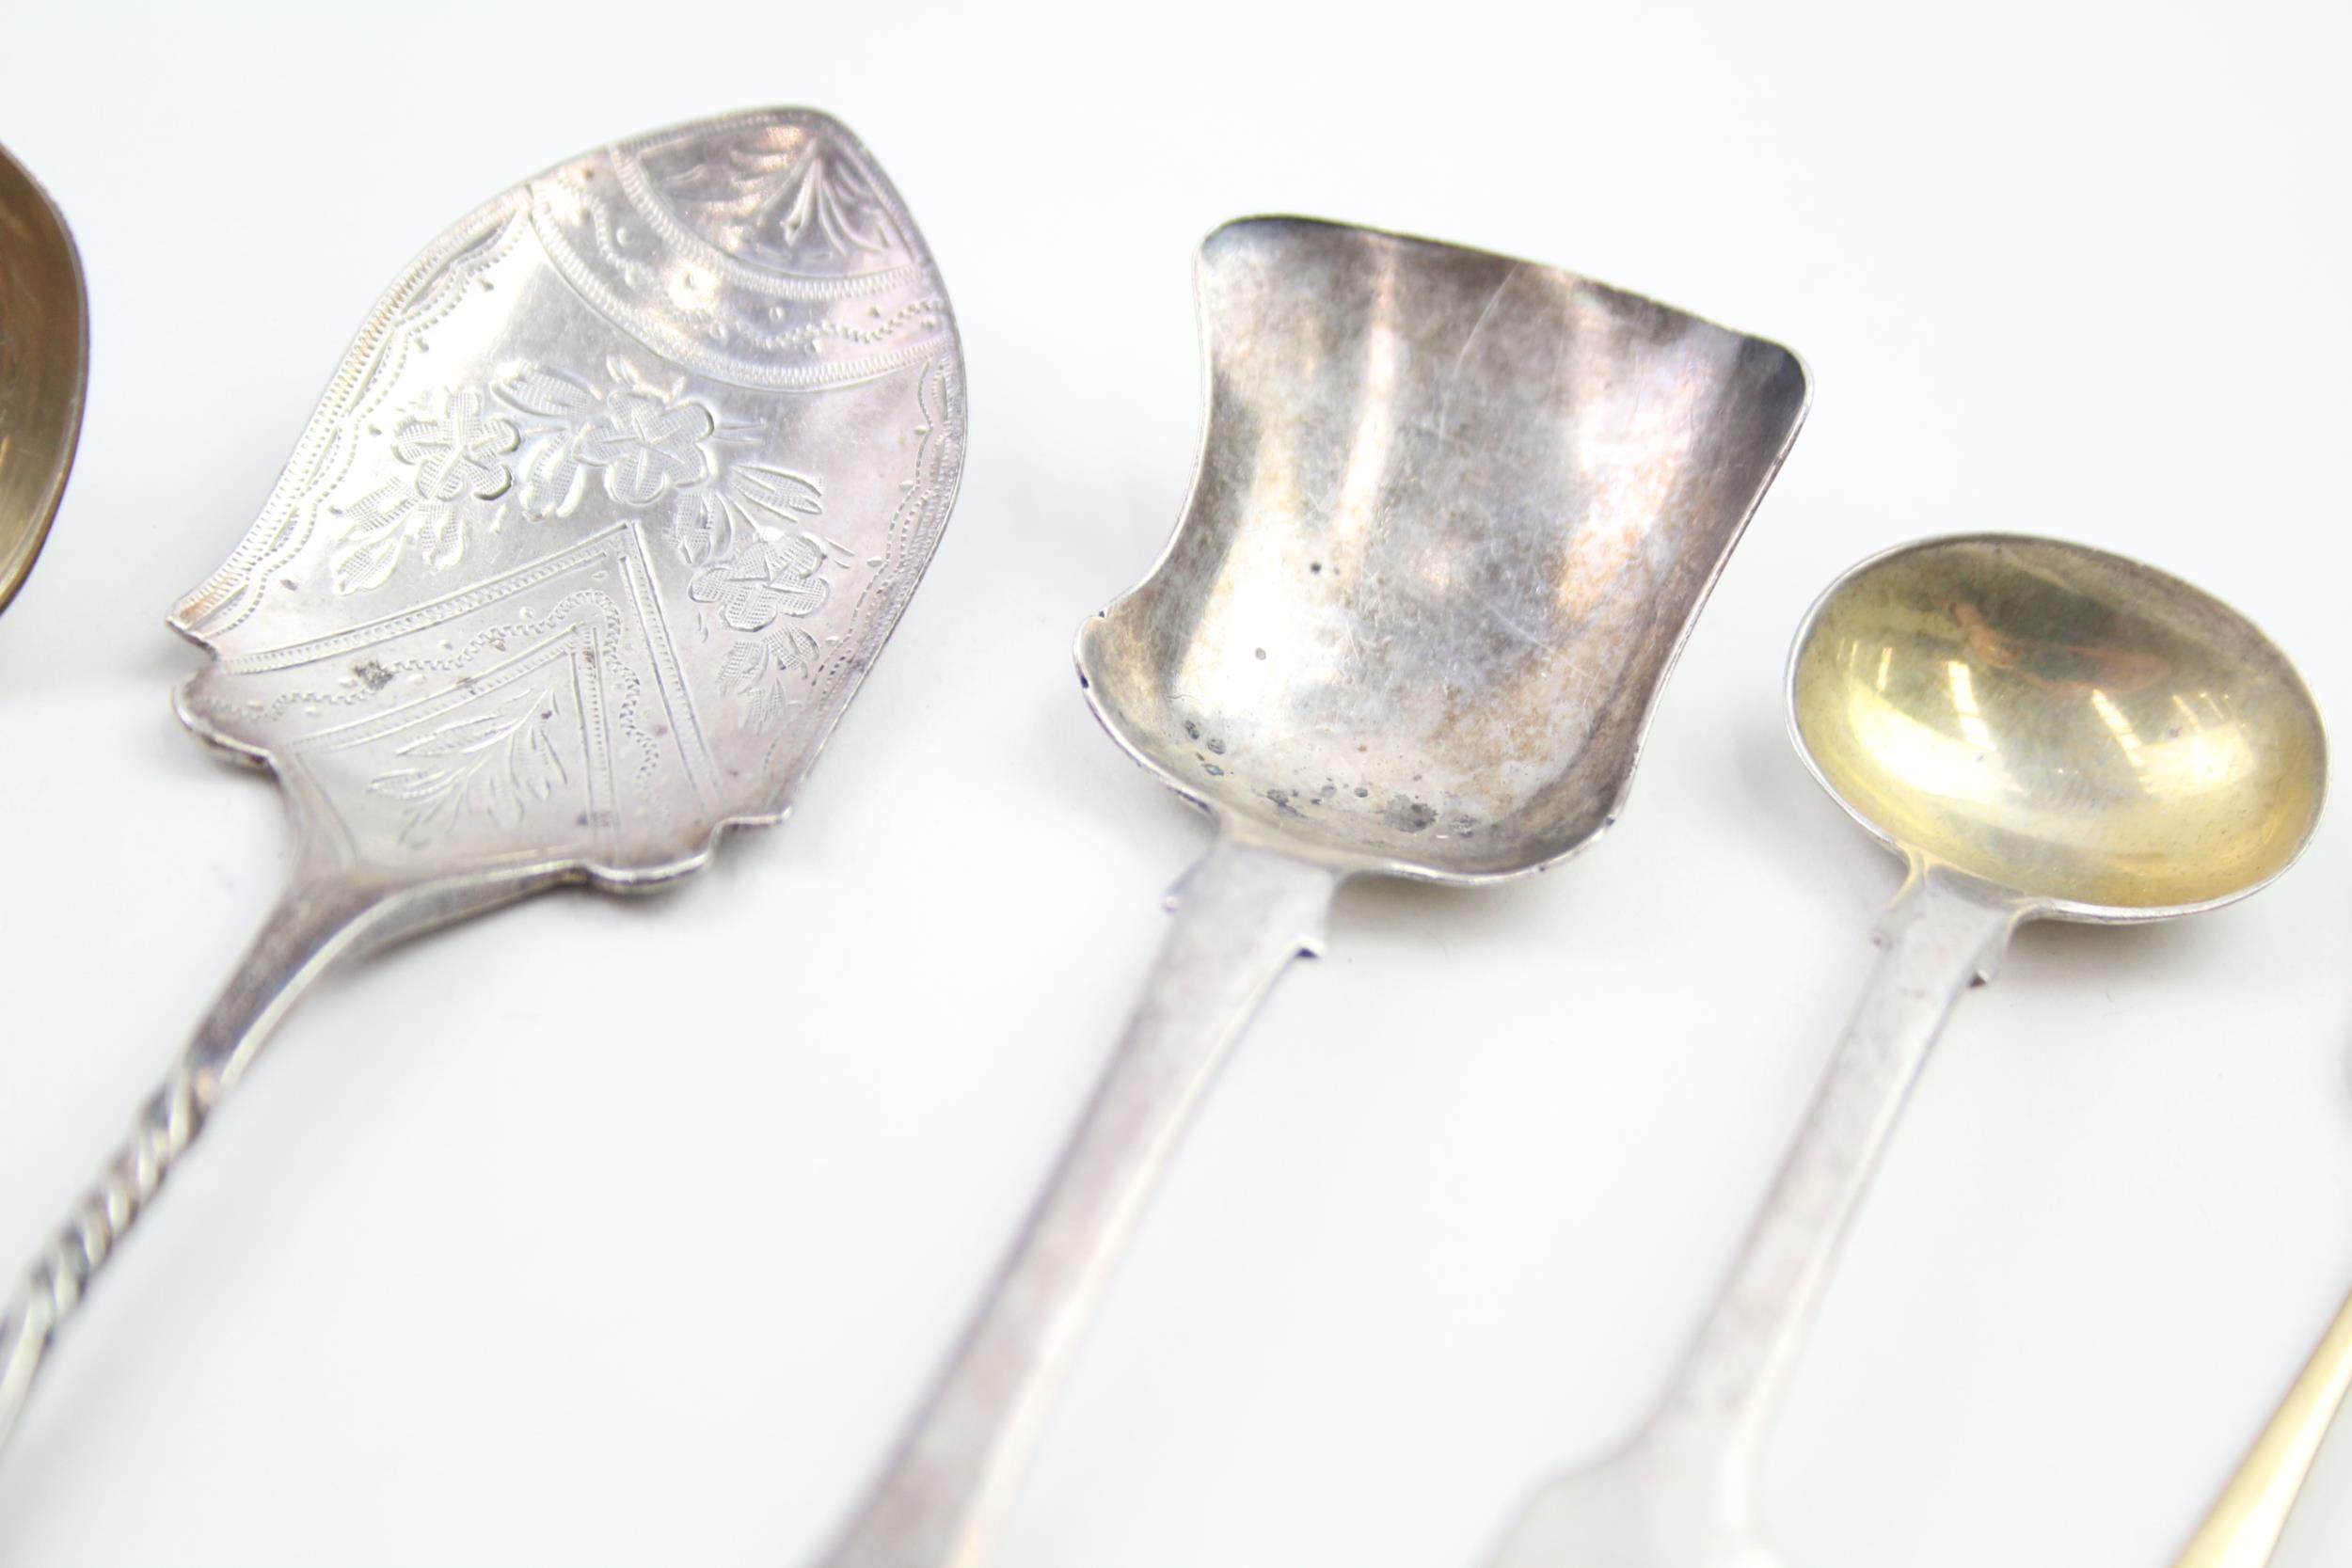 9 x Antique Vintage HM .925 Sterling Silver Spoons Inc Bottom Marked Etc (100g) - In antique / - Image 5 of 7